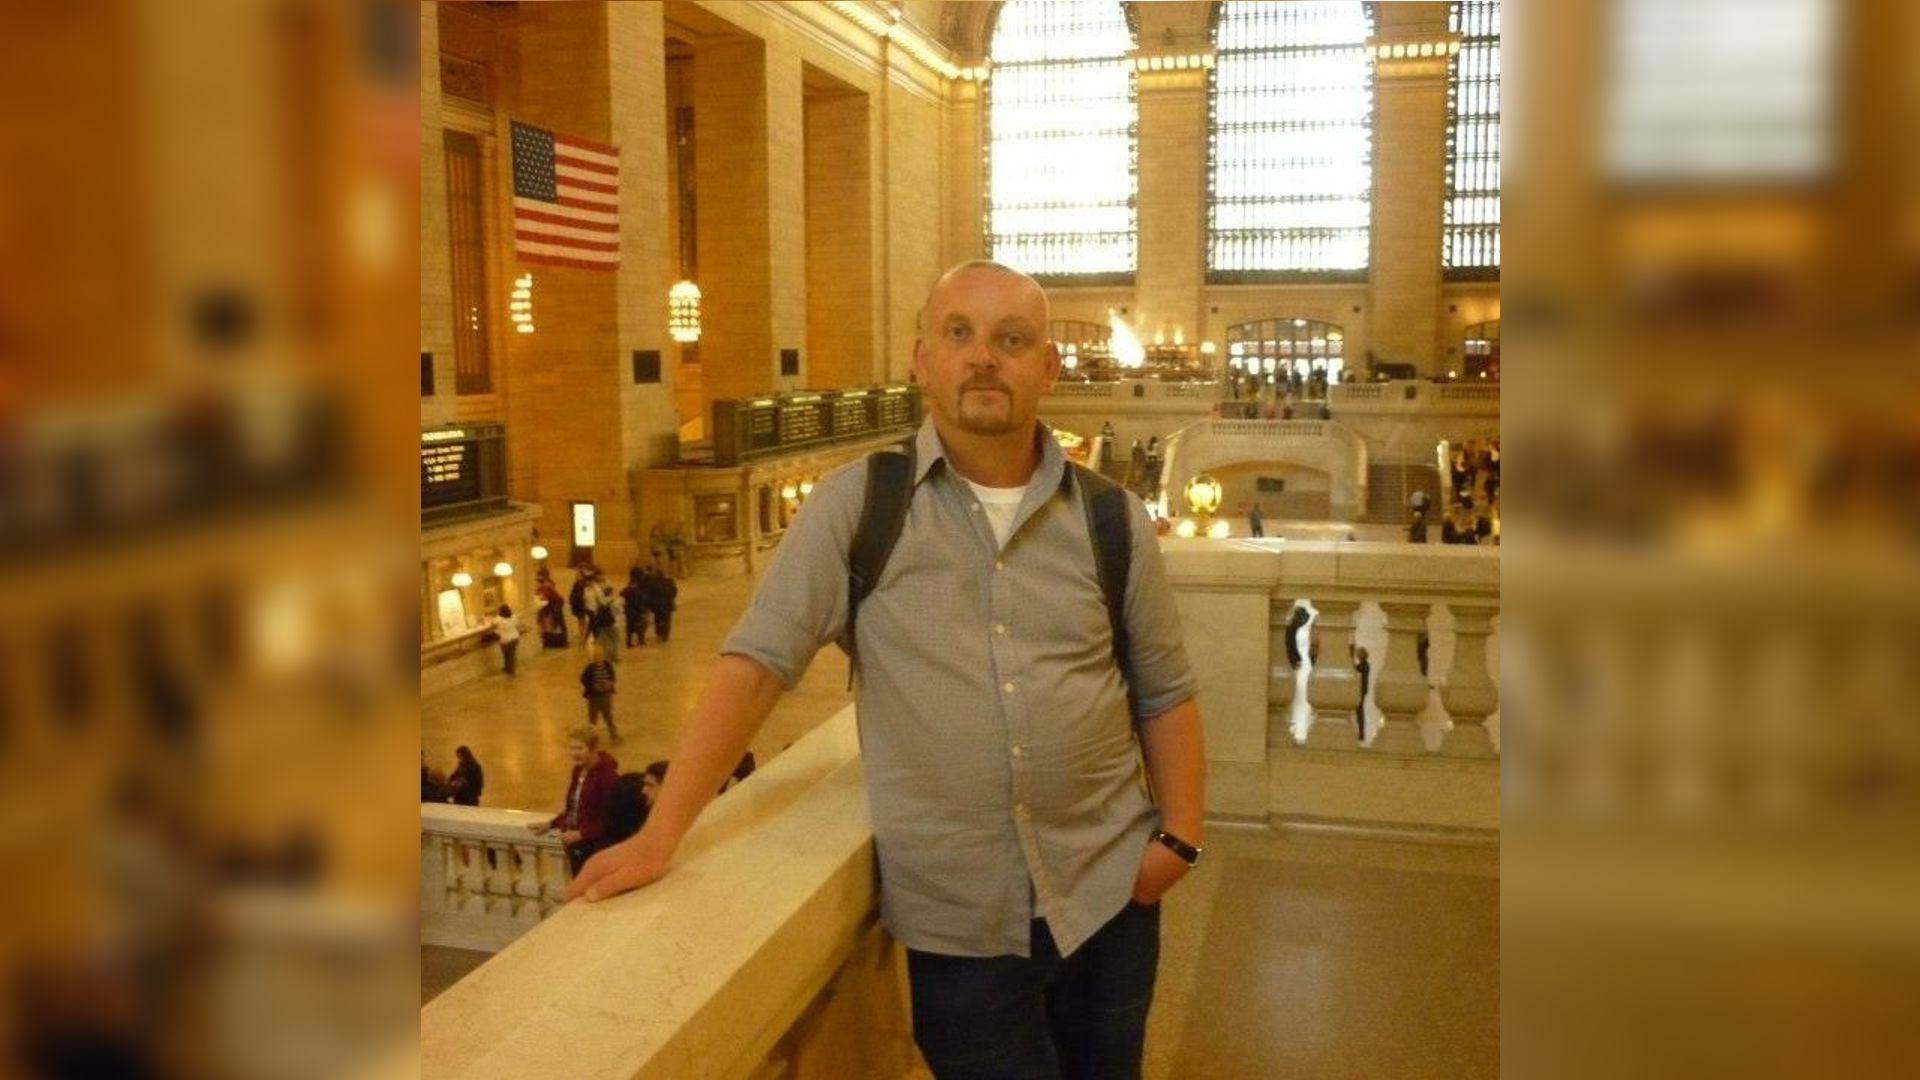 A man with a visible difference standing in Grand Central